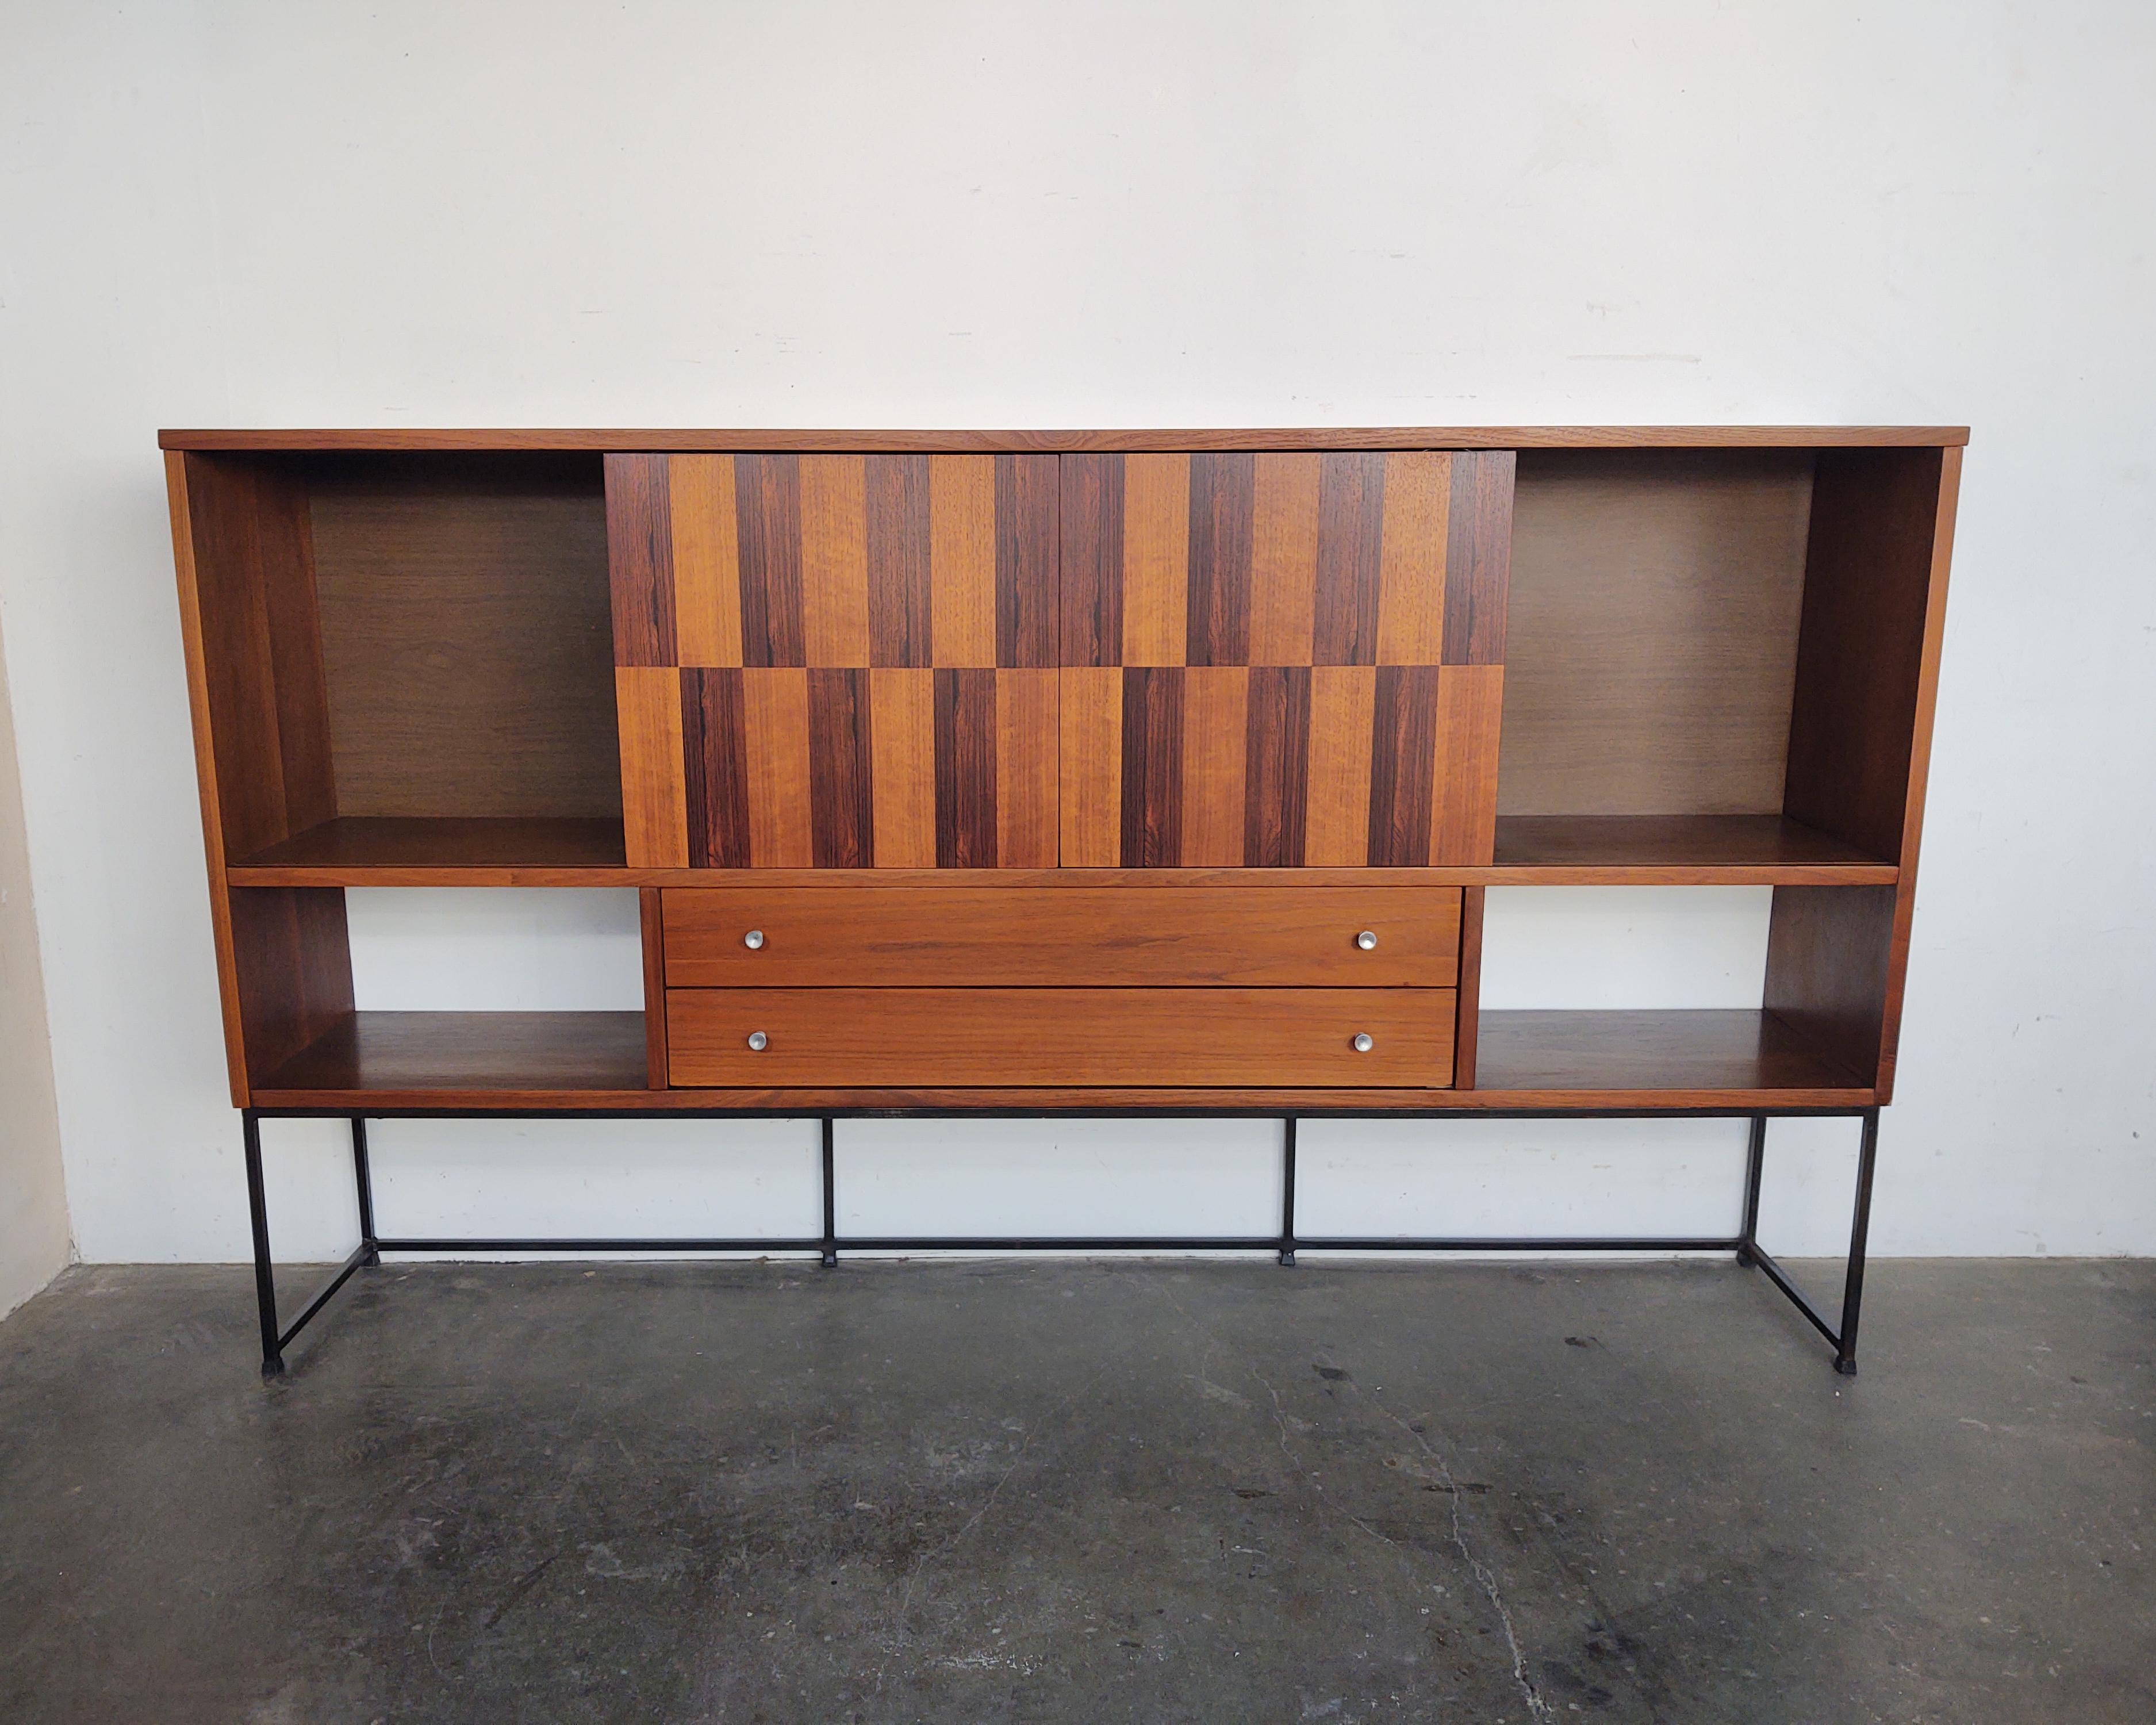 Beautiful cabinet with walnut and rosewood checkered sliding doors and open shelving. Two closed cabinets and two drawers with aluminum hardware. The upper cabinet is mounted on a welded steel frame that has some light patina.

Measures:72